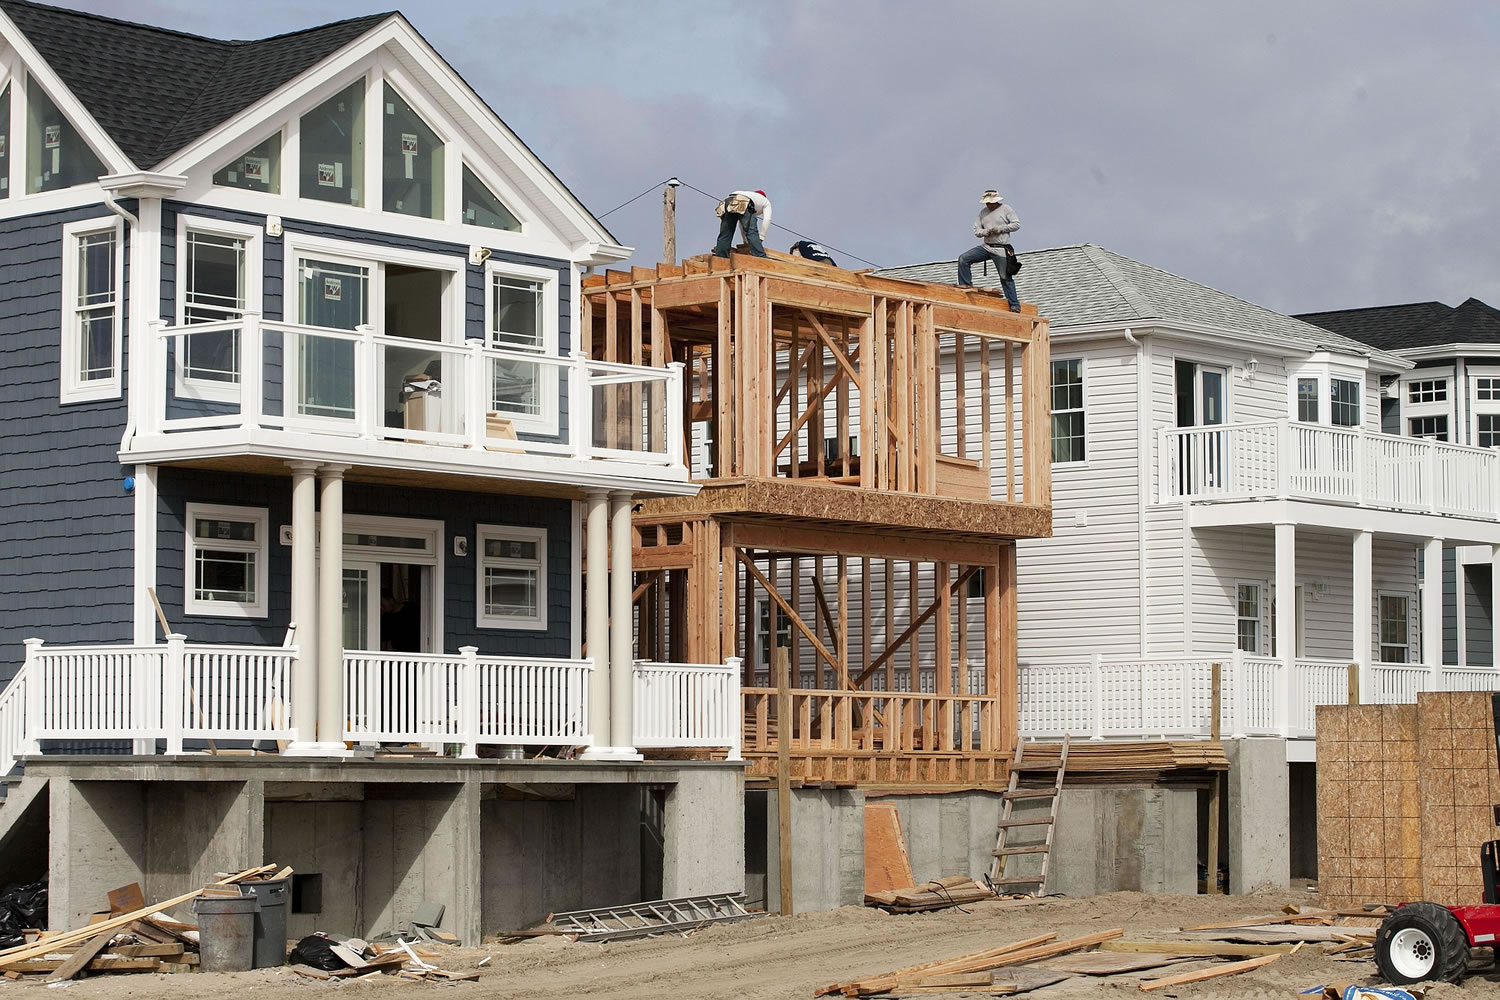 Carpenters work on a home under construction, center, between other new homes Oct. 15 in the Breezy Point neighborhood of the Queens borough of New York, an area hard hit by Superstorm Sandy in 2012.